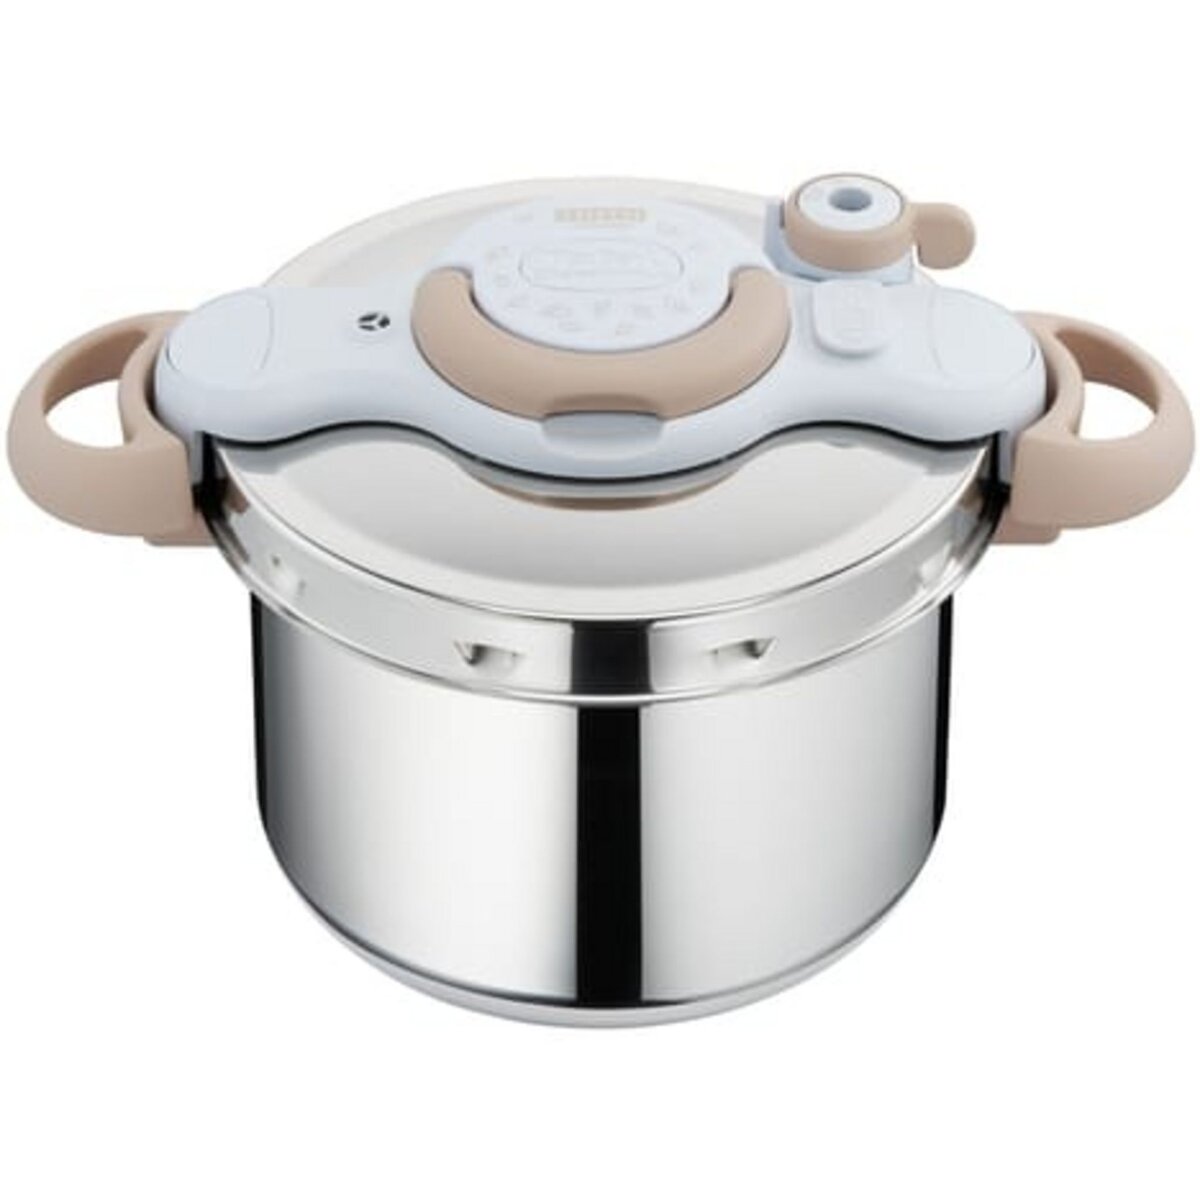 SEB Cocotte-minute induction CLIPSOMINUT NATURAL 7,5 L 